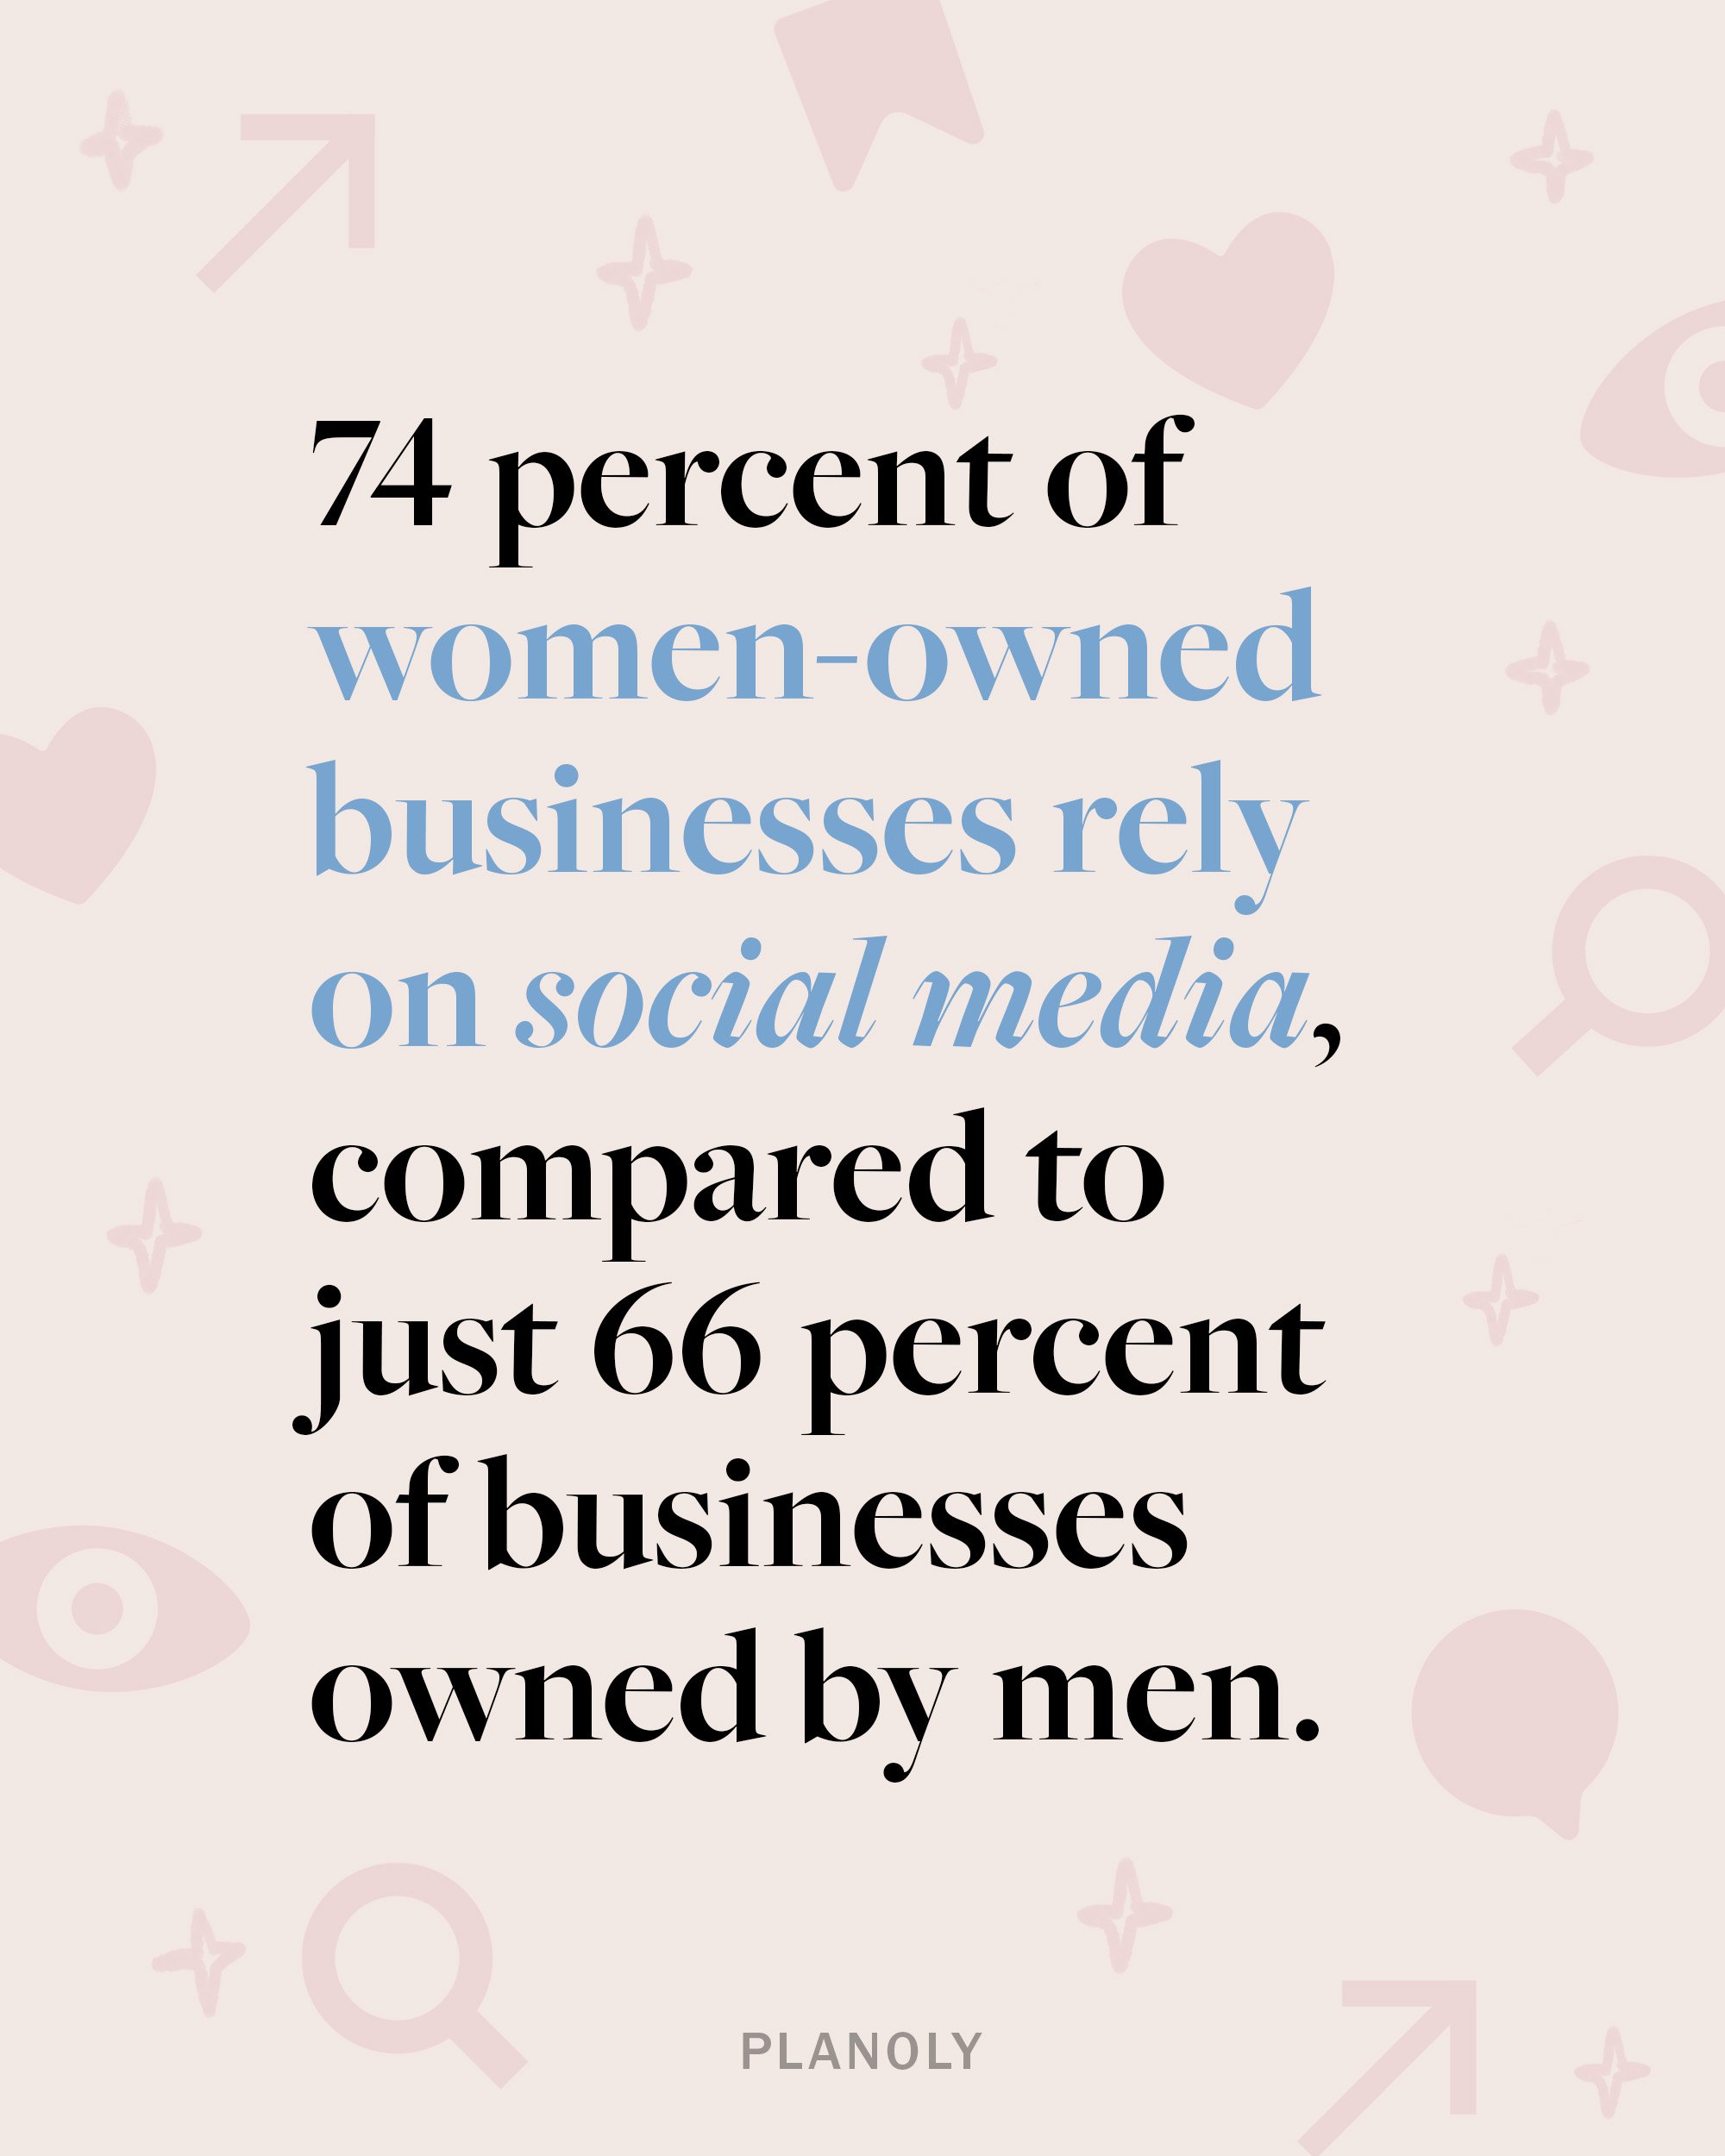 Marketing Best Practices_Statistic_Women-Owned Businesses on Social Media_IG Grid_March 2022.jpg